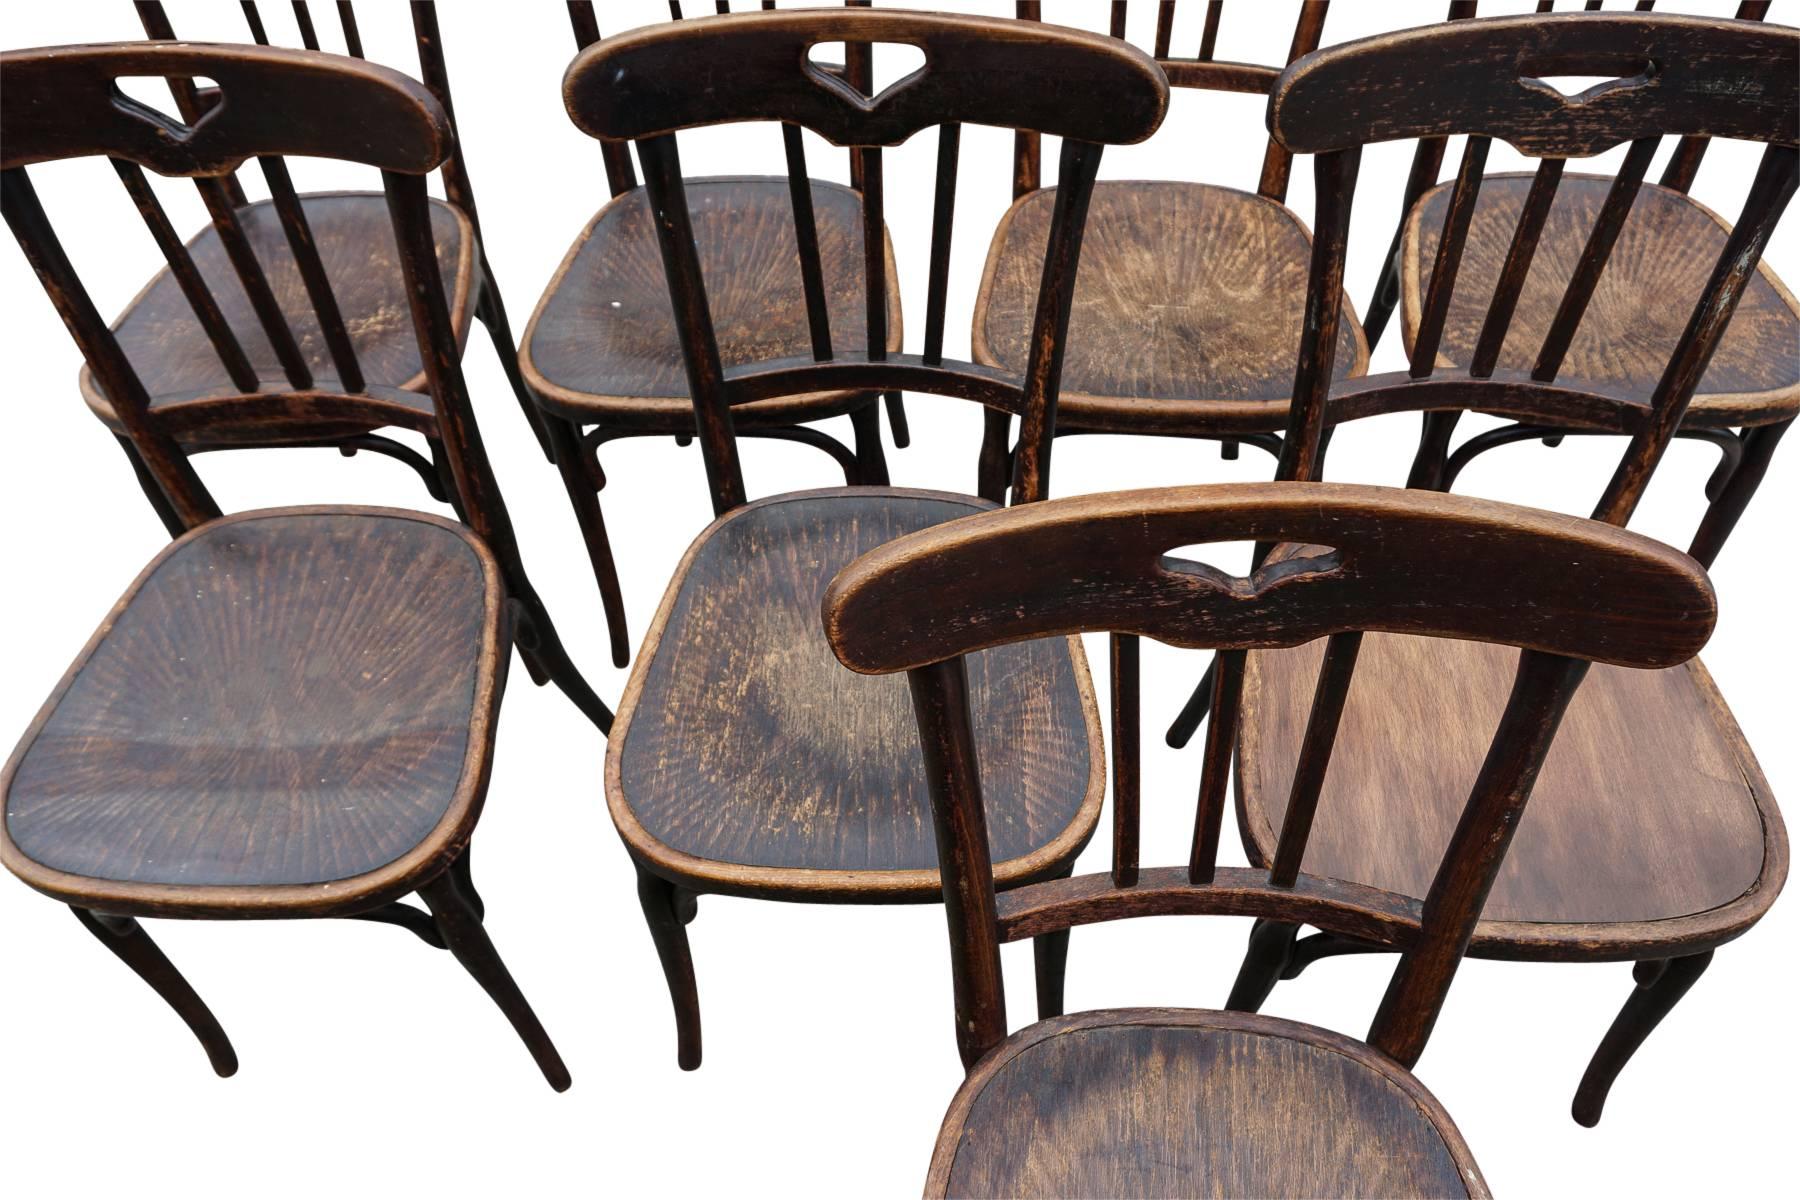 Eight bistro chairs from a theatre in France, manufactured by J & J Kohn, Austria. One seat replaced. Very good quality and design.